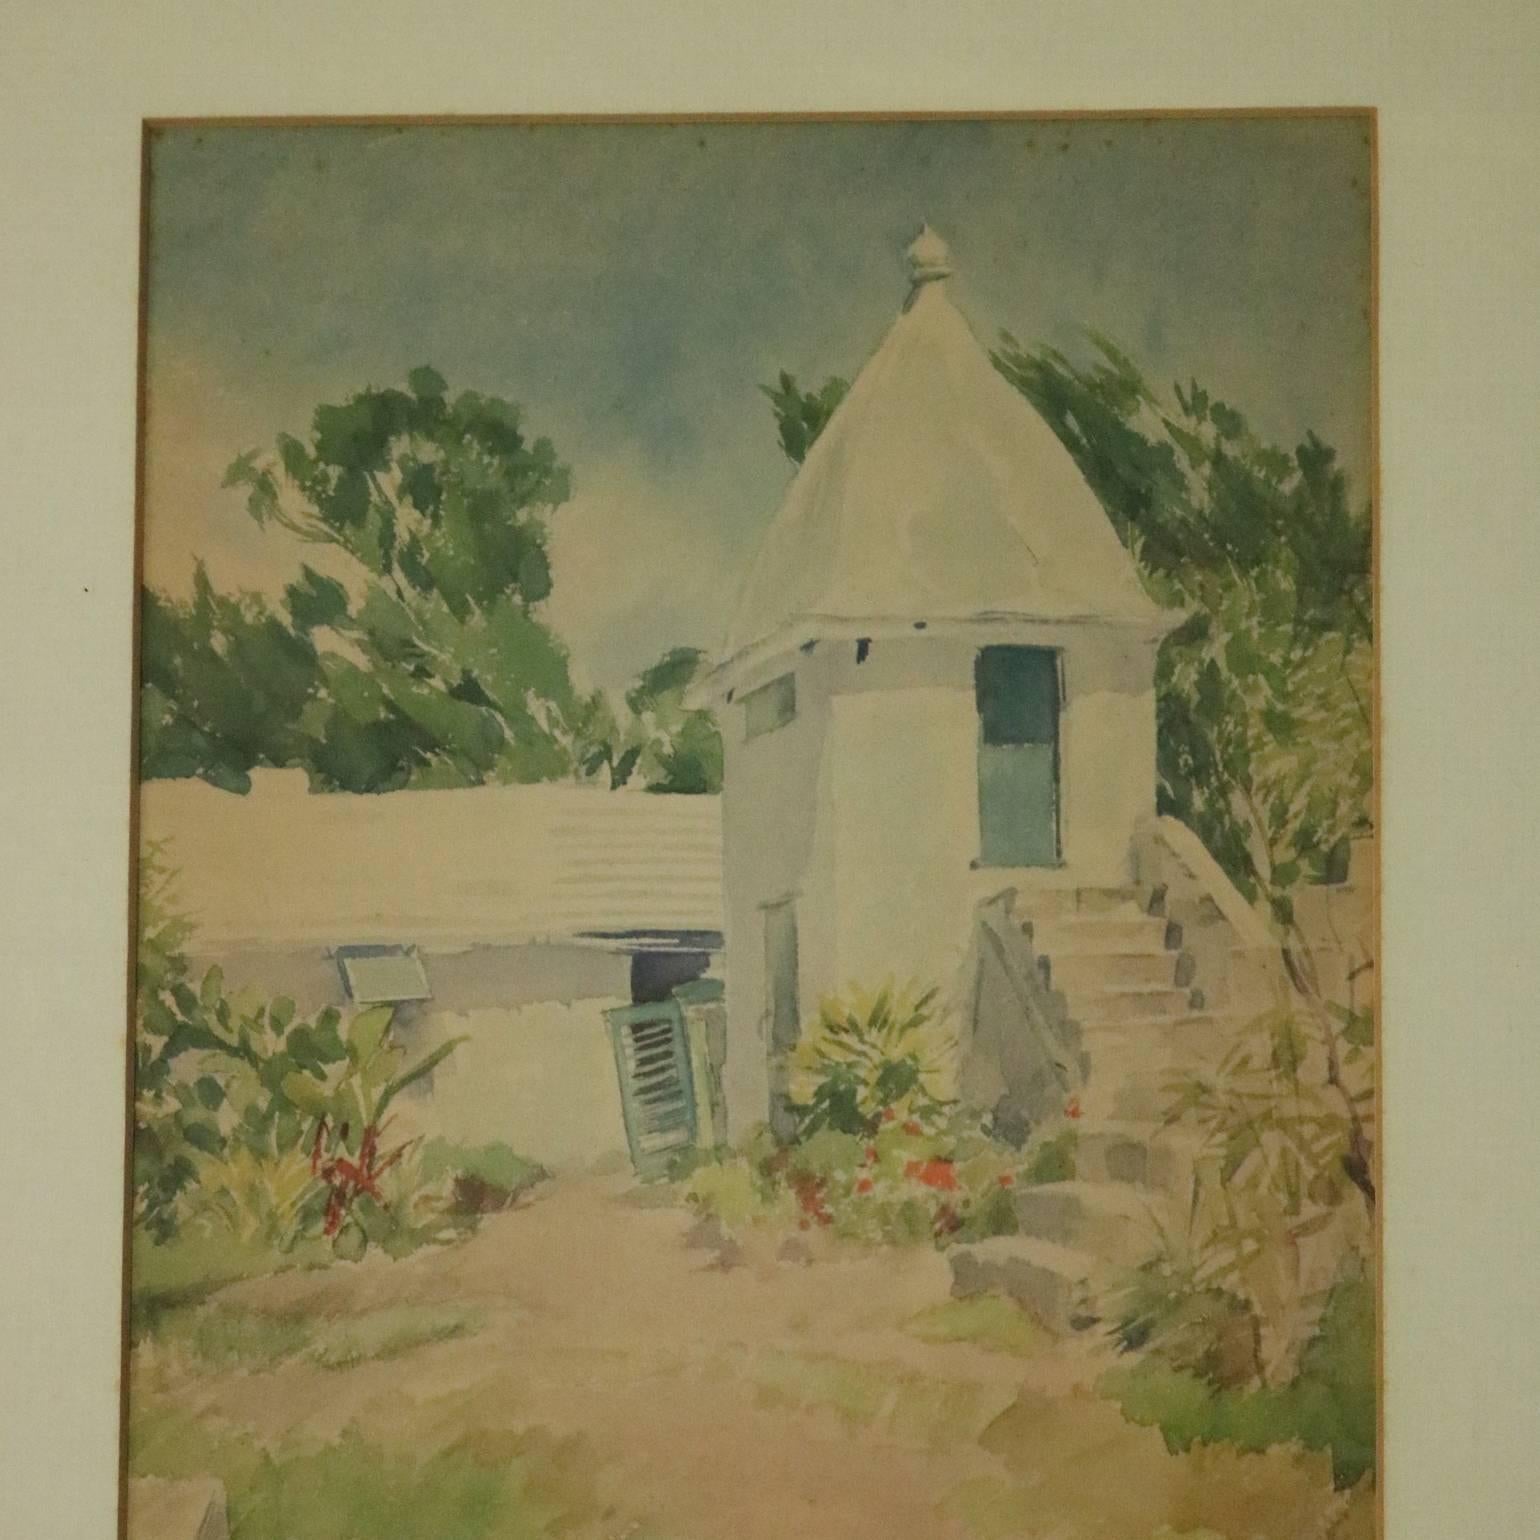 Set of three vintage prints of watercolor paintings by Adolph Treidler (American, 1886-1981) depicting coastal scenes of Bermuda; "Rocks Near Bailey's Bay, "Queen Street, St. George's", and "Old Buttery at Somerset", 20th